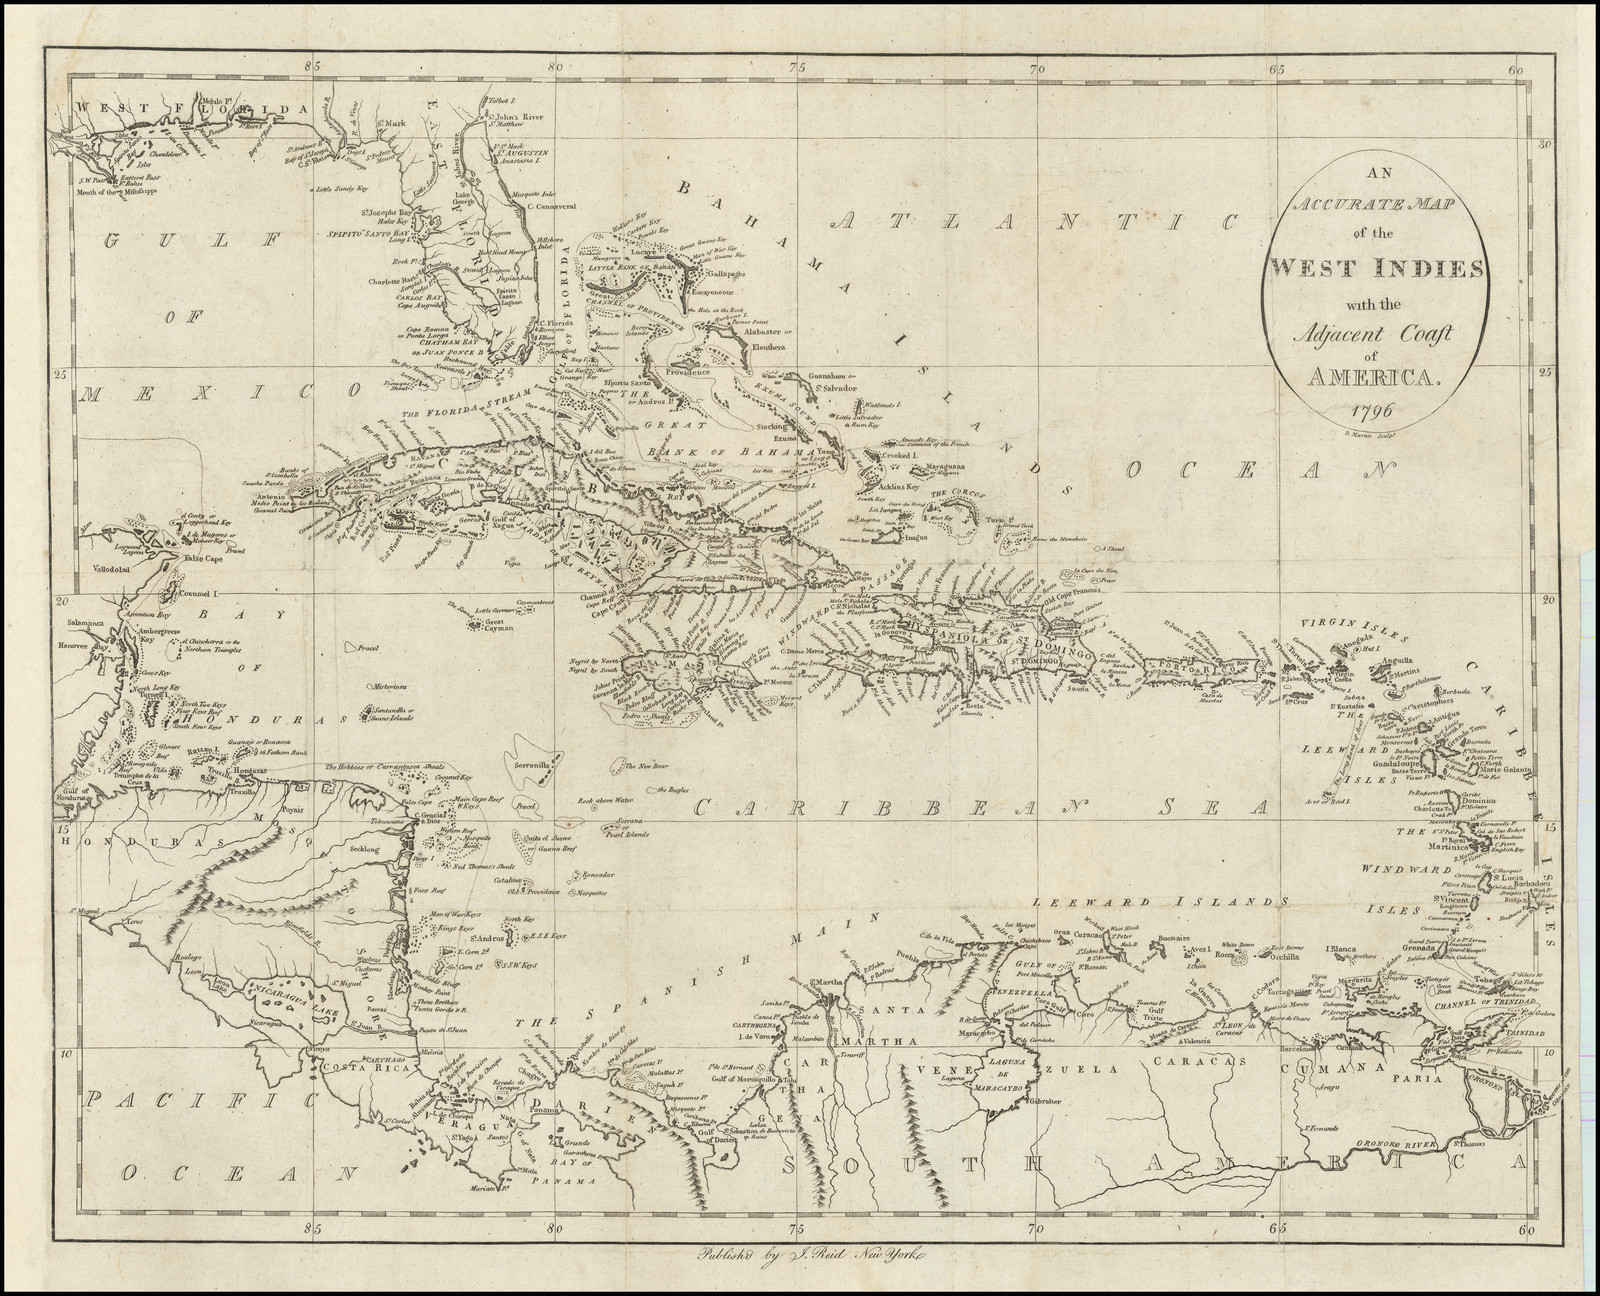 An Accurate Map of the West Indies with Adjacent Coast of America 1796 by Cartographer John Reid